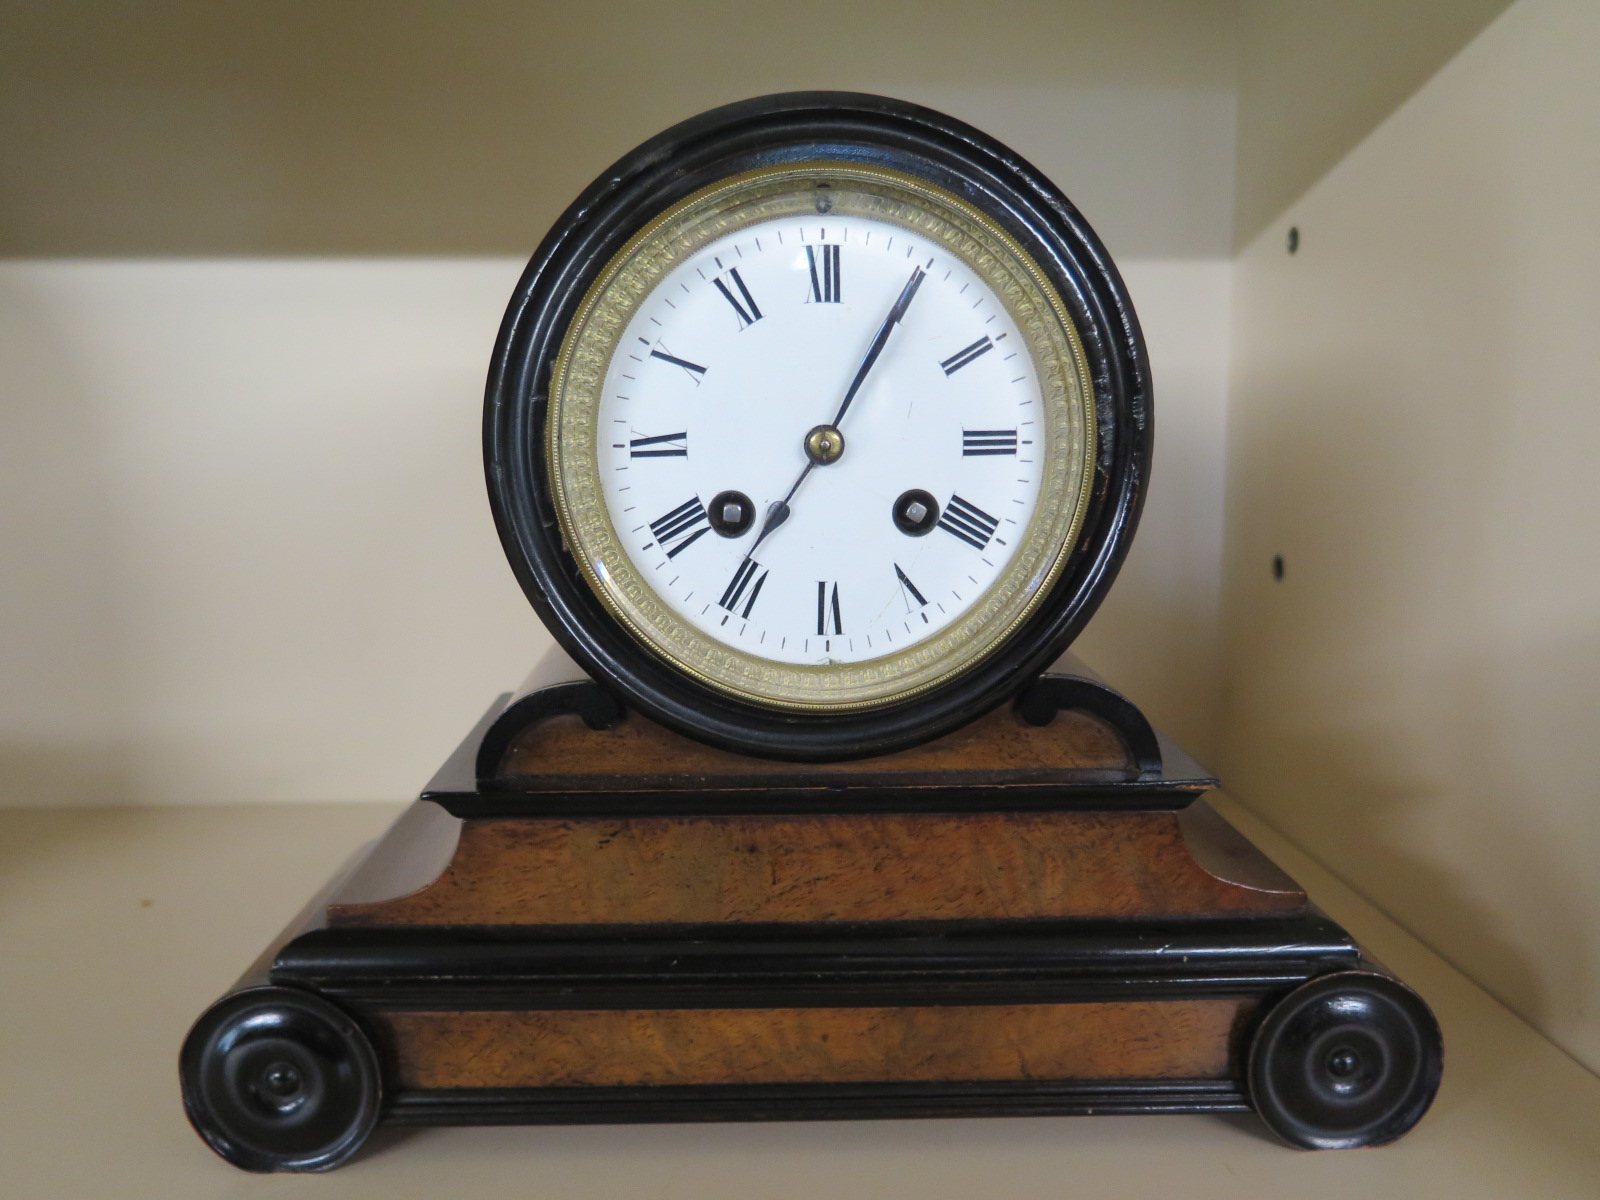 A 19th century walnut and ebony French mantle clock with 8 day movement strikes on a bell,